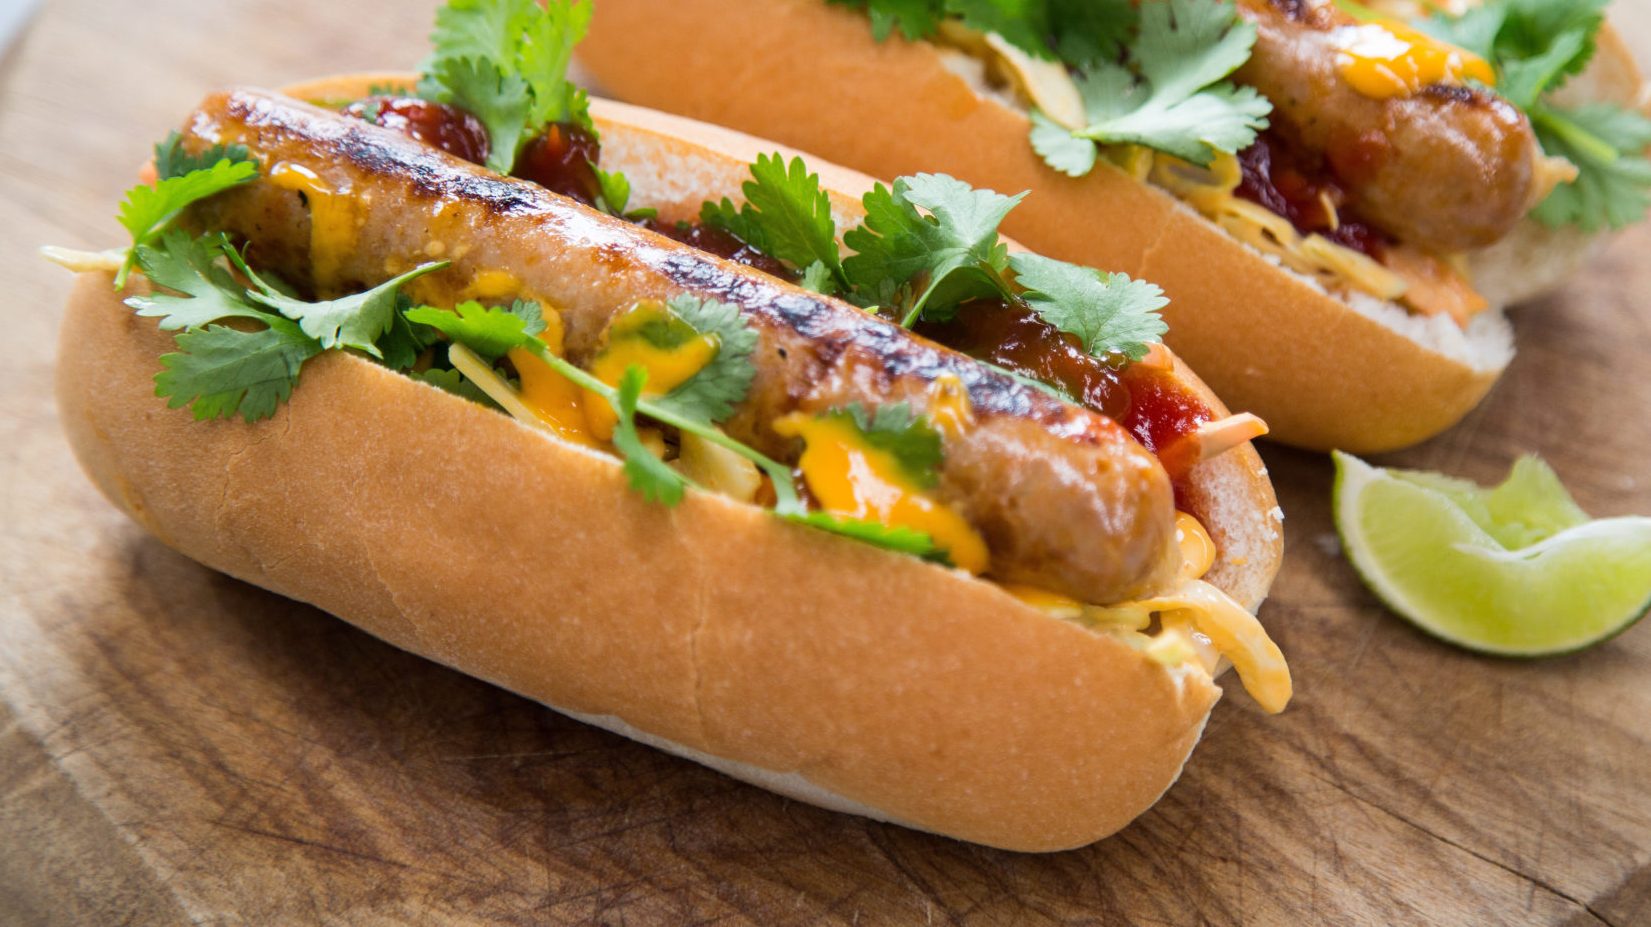 Hot dog with sriracha hot sauce garnished with coriander on a wooden board